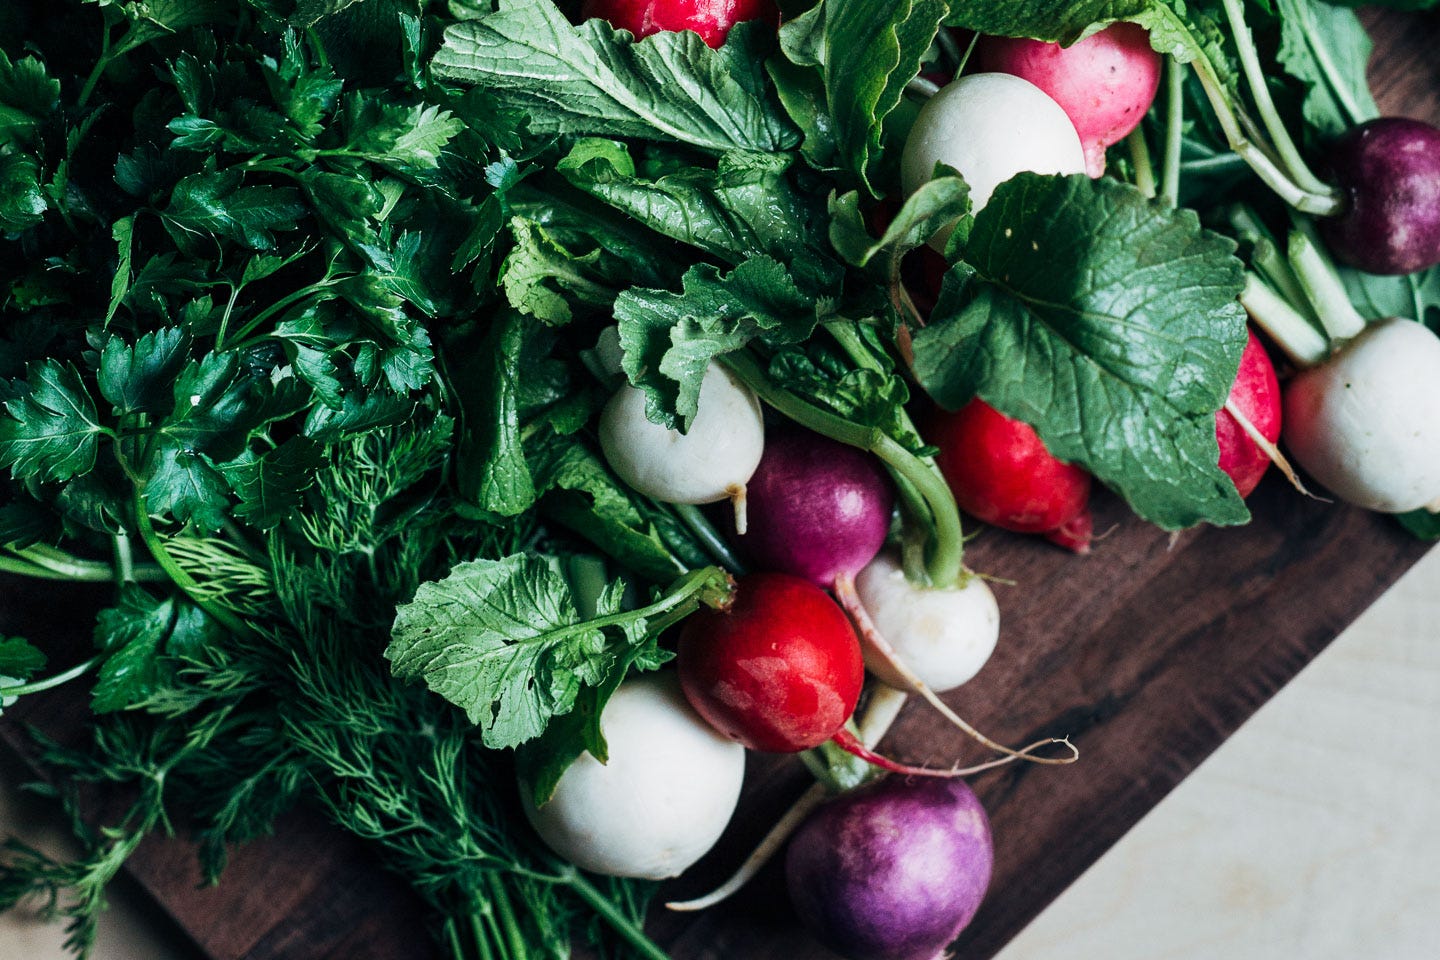 Radishes and herbs on a cutting board